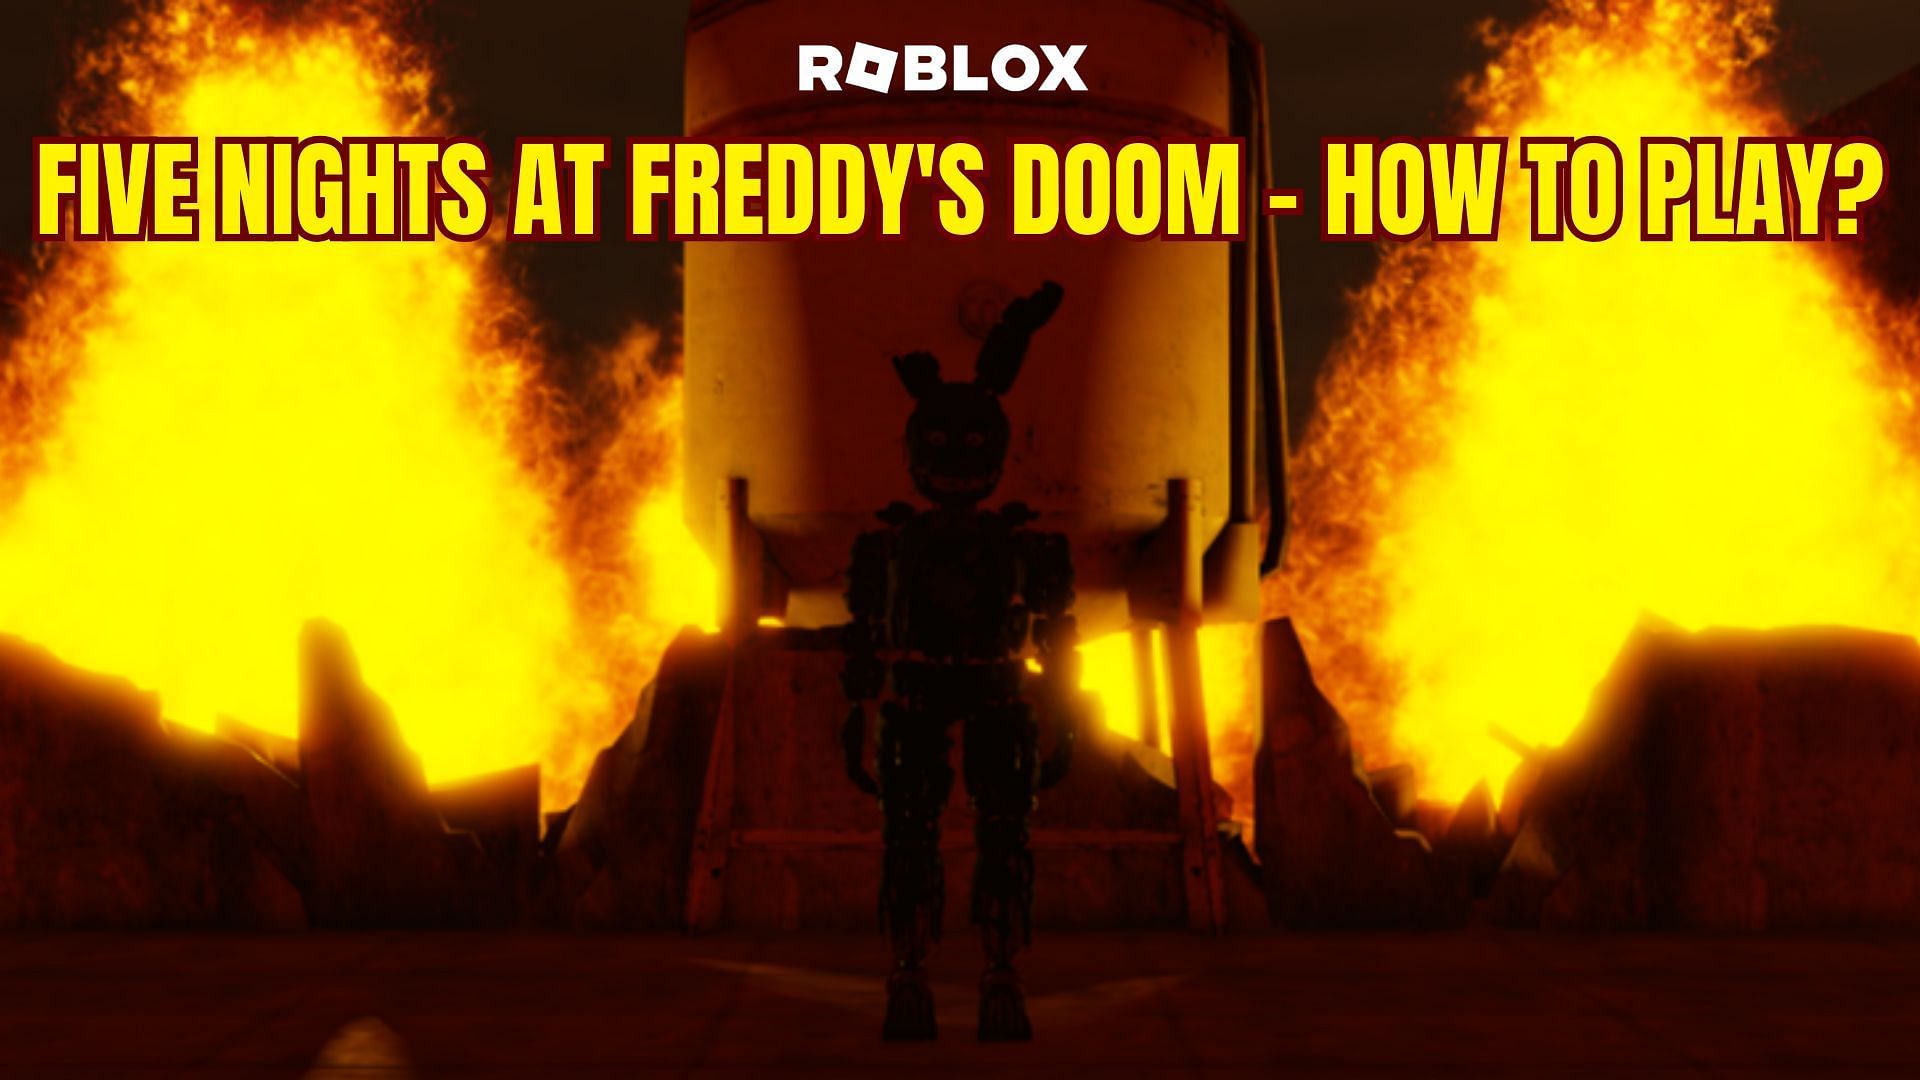 ROBLOX Fnaf 1 Doom but we're terrorized by Torch the whole game